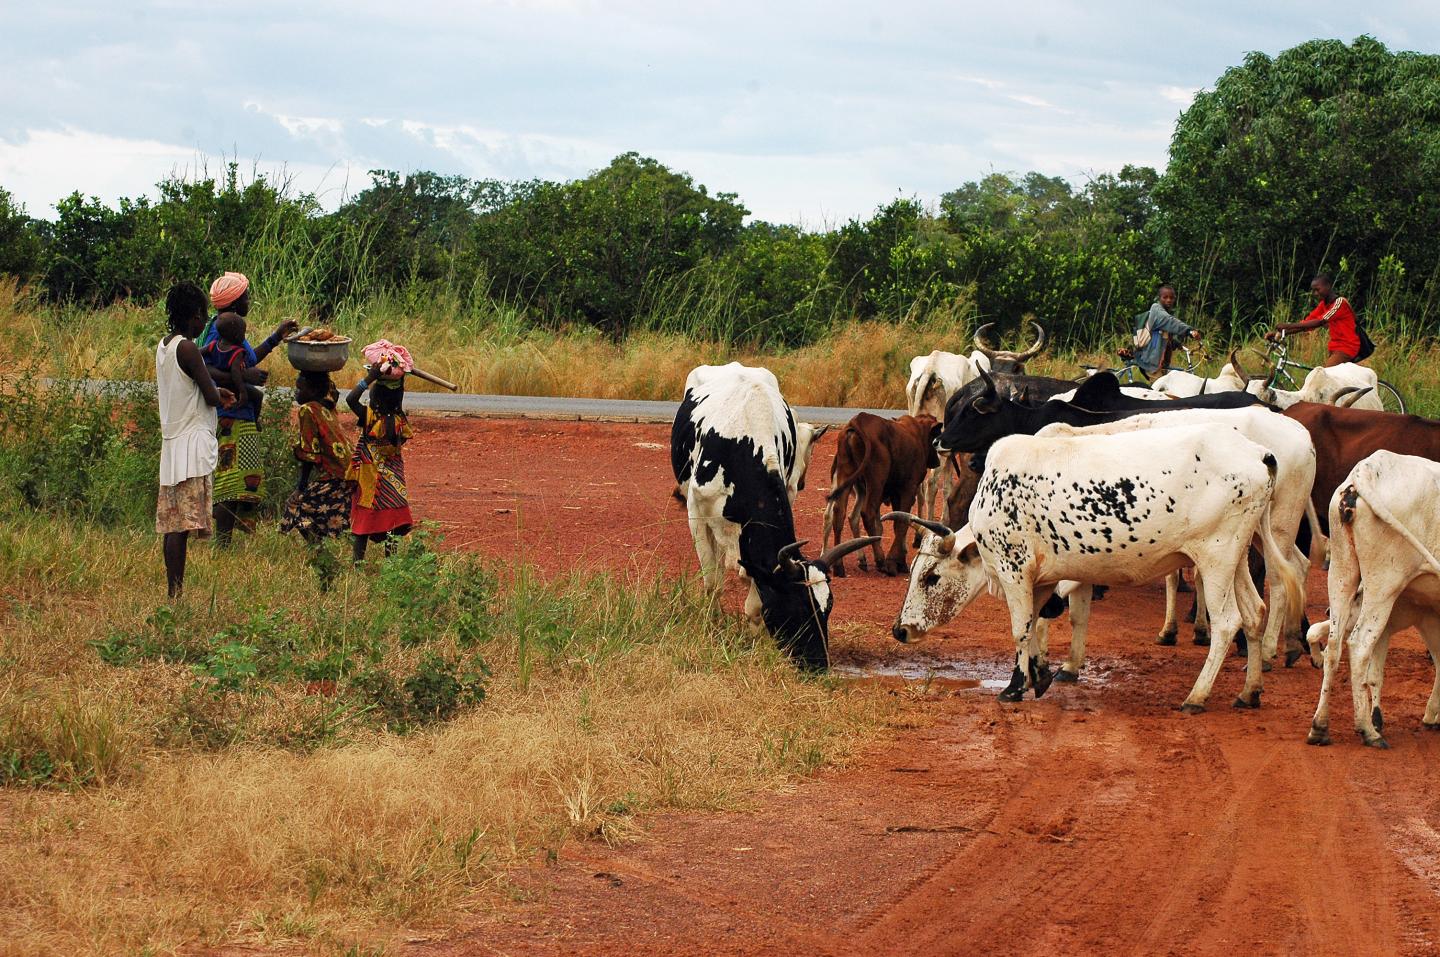 Villagers and Cattle on Dirt Road